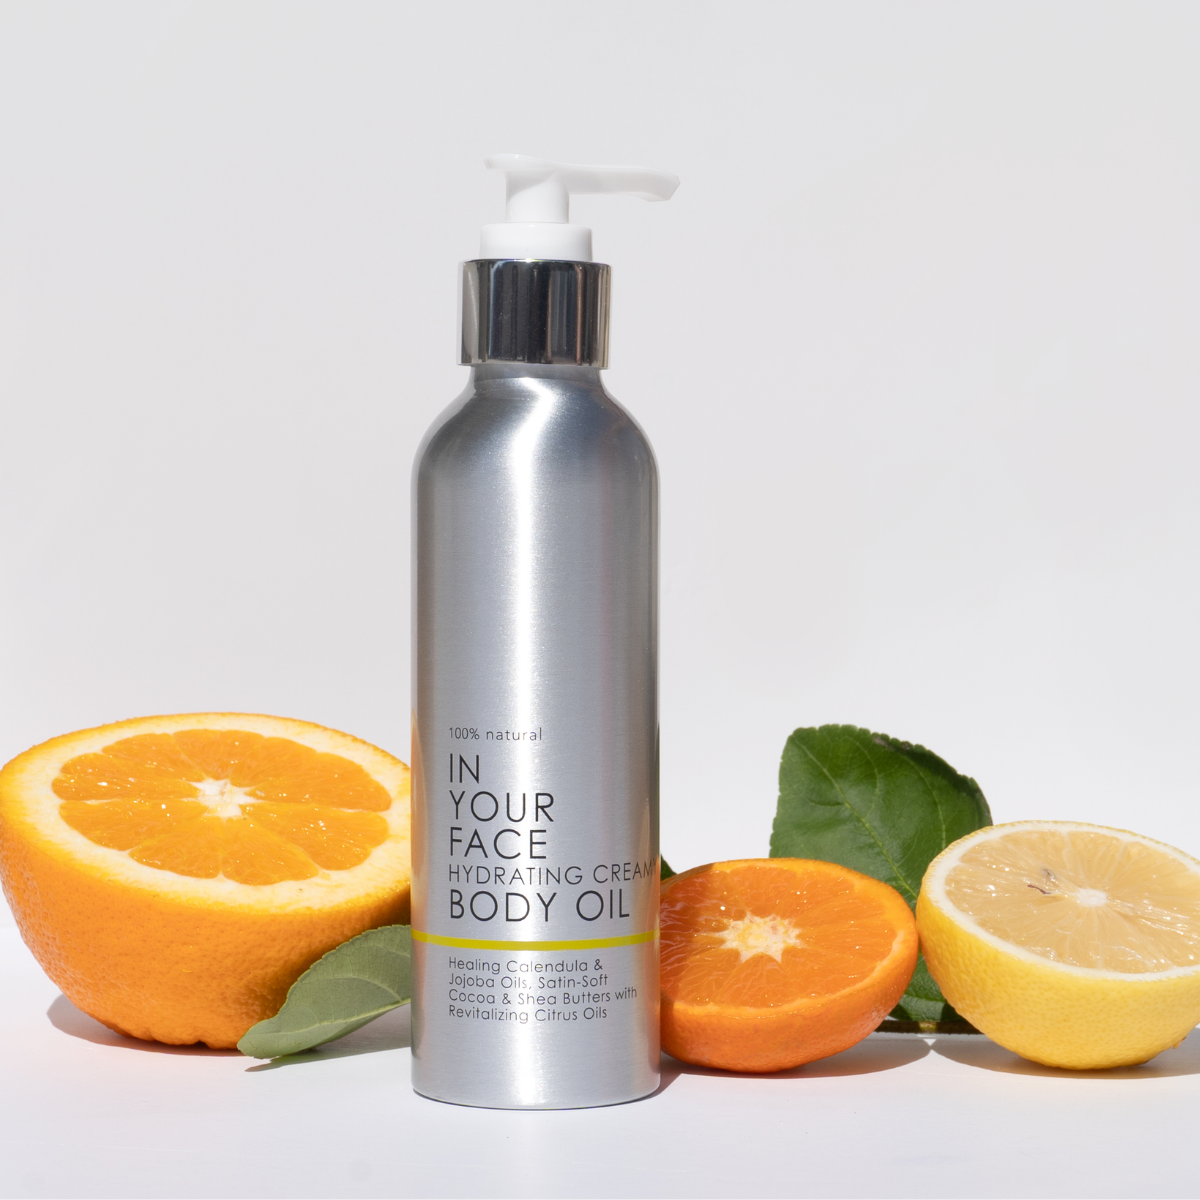 A photo of the BODY OIL standing up surrounded by a few oranges.